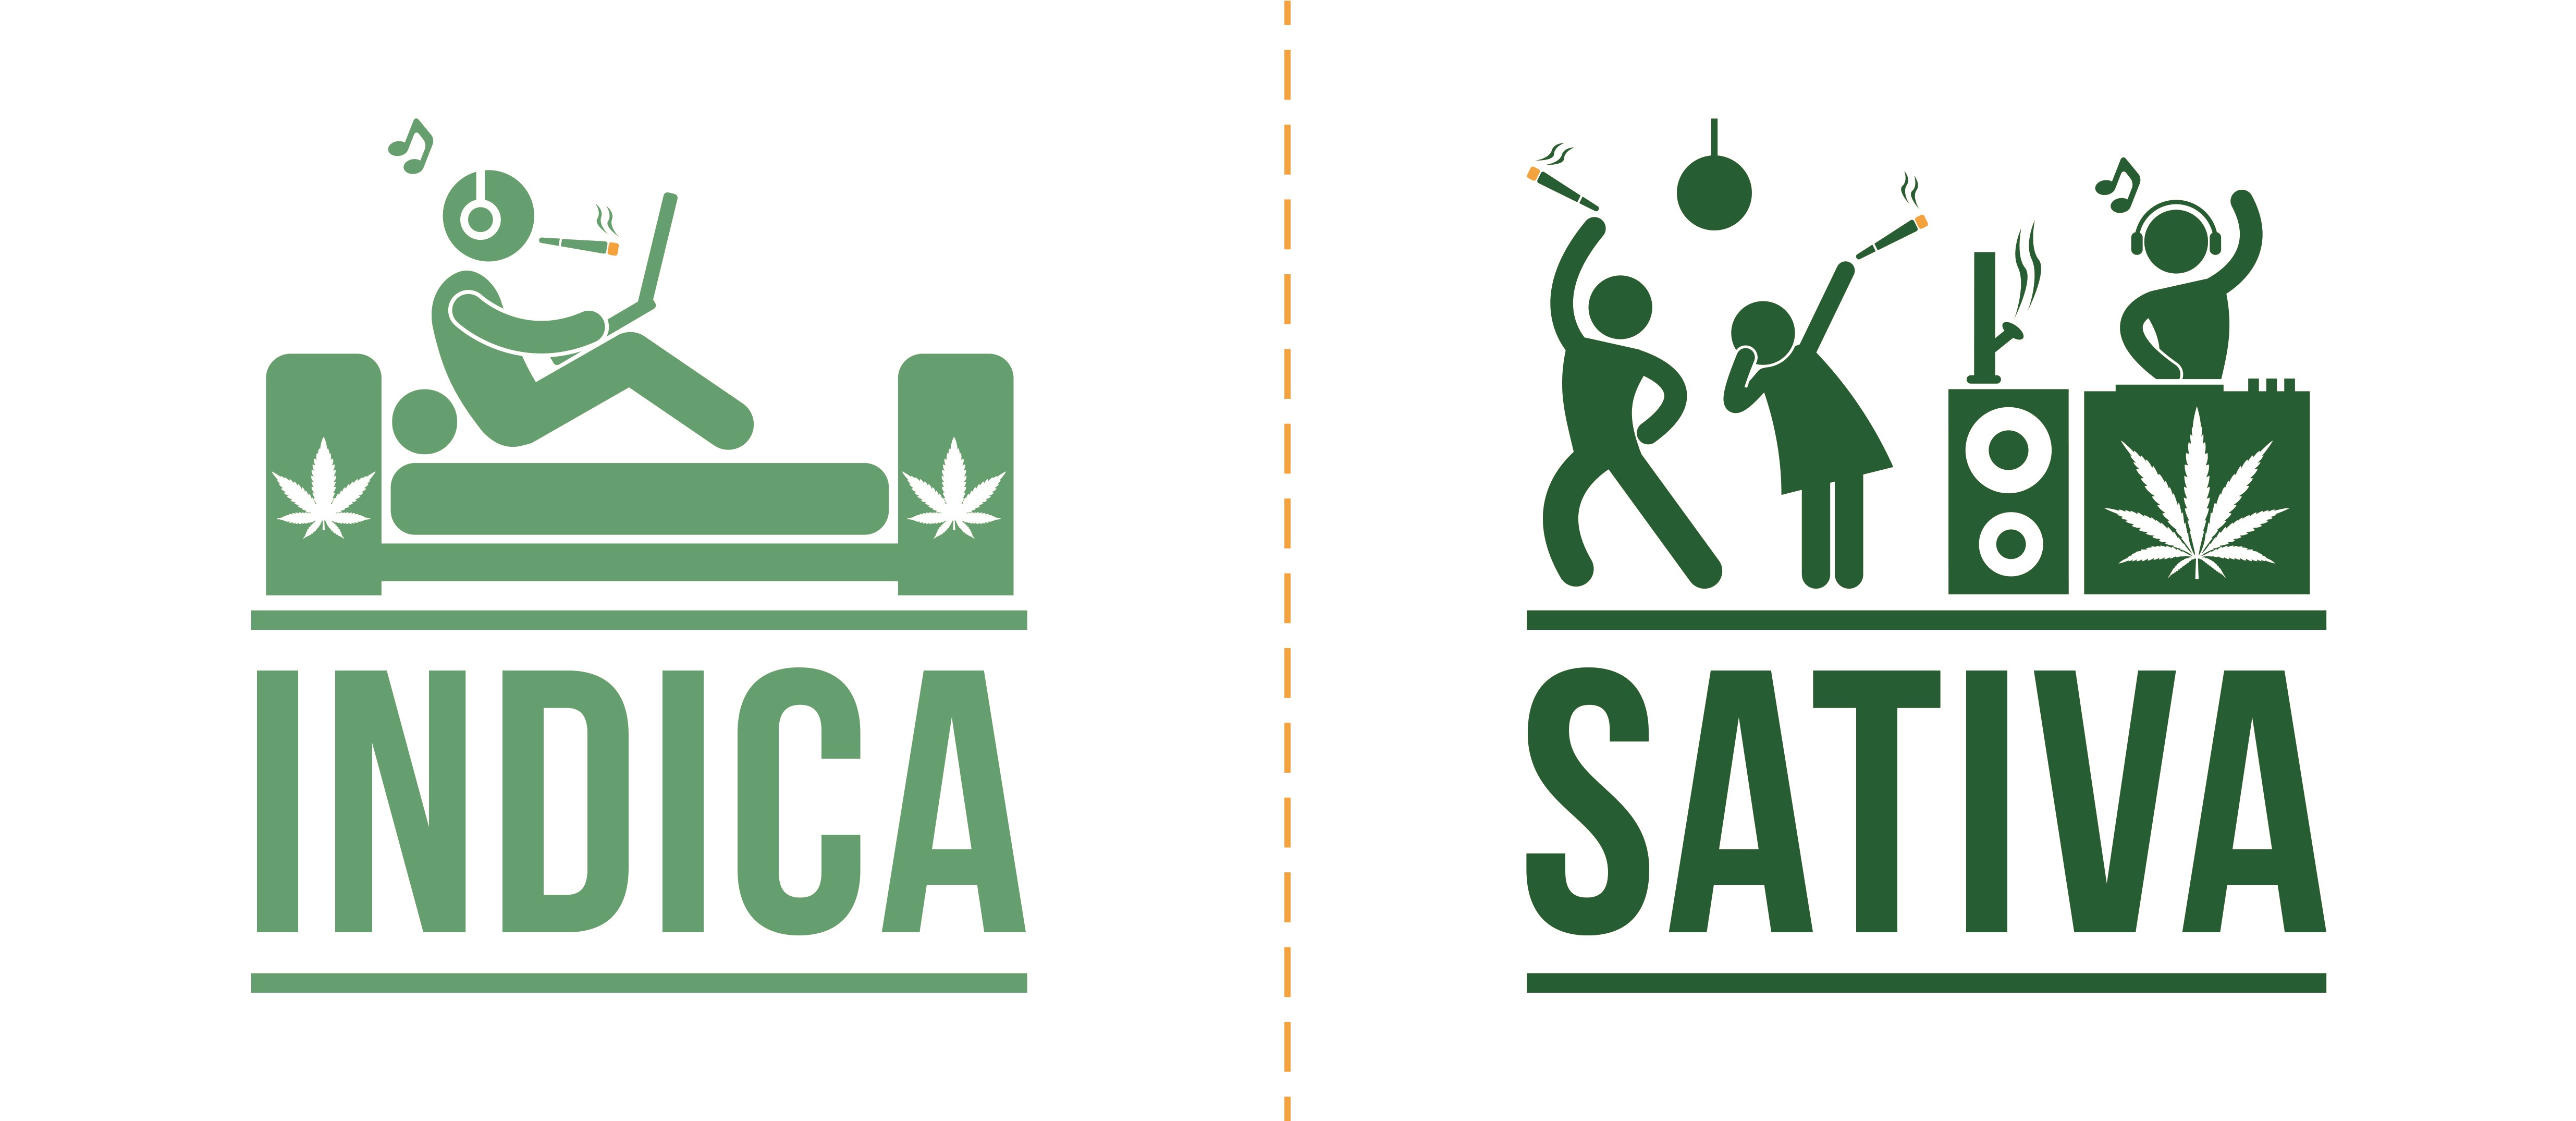 Difference-entre-Indica-et-Sativa-effets.jpg